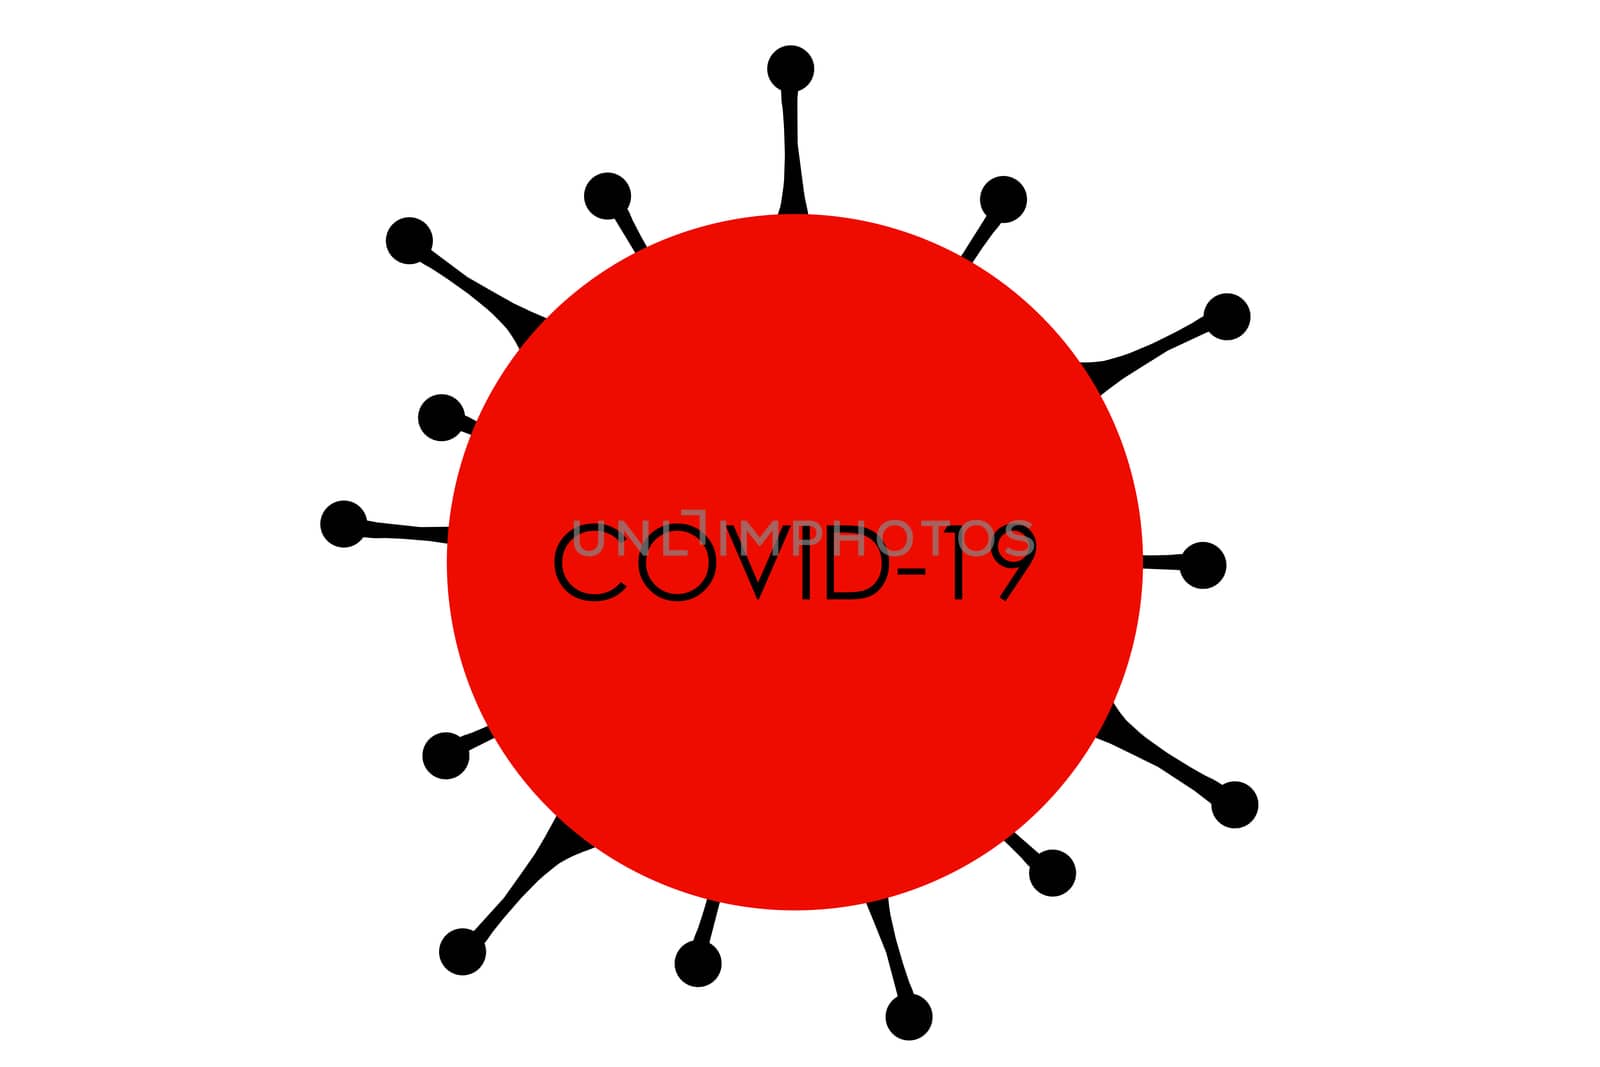 COVID-19 Coronavirus graphic design of corona virus model illustration on white background with text title in center of red sphere.